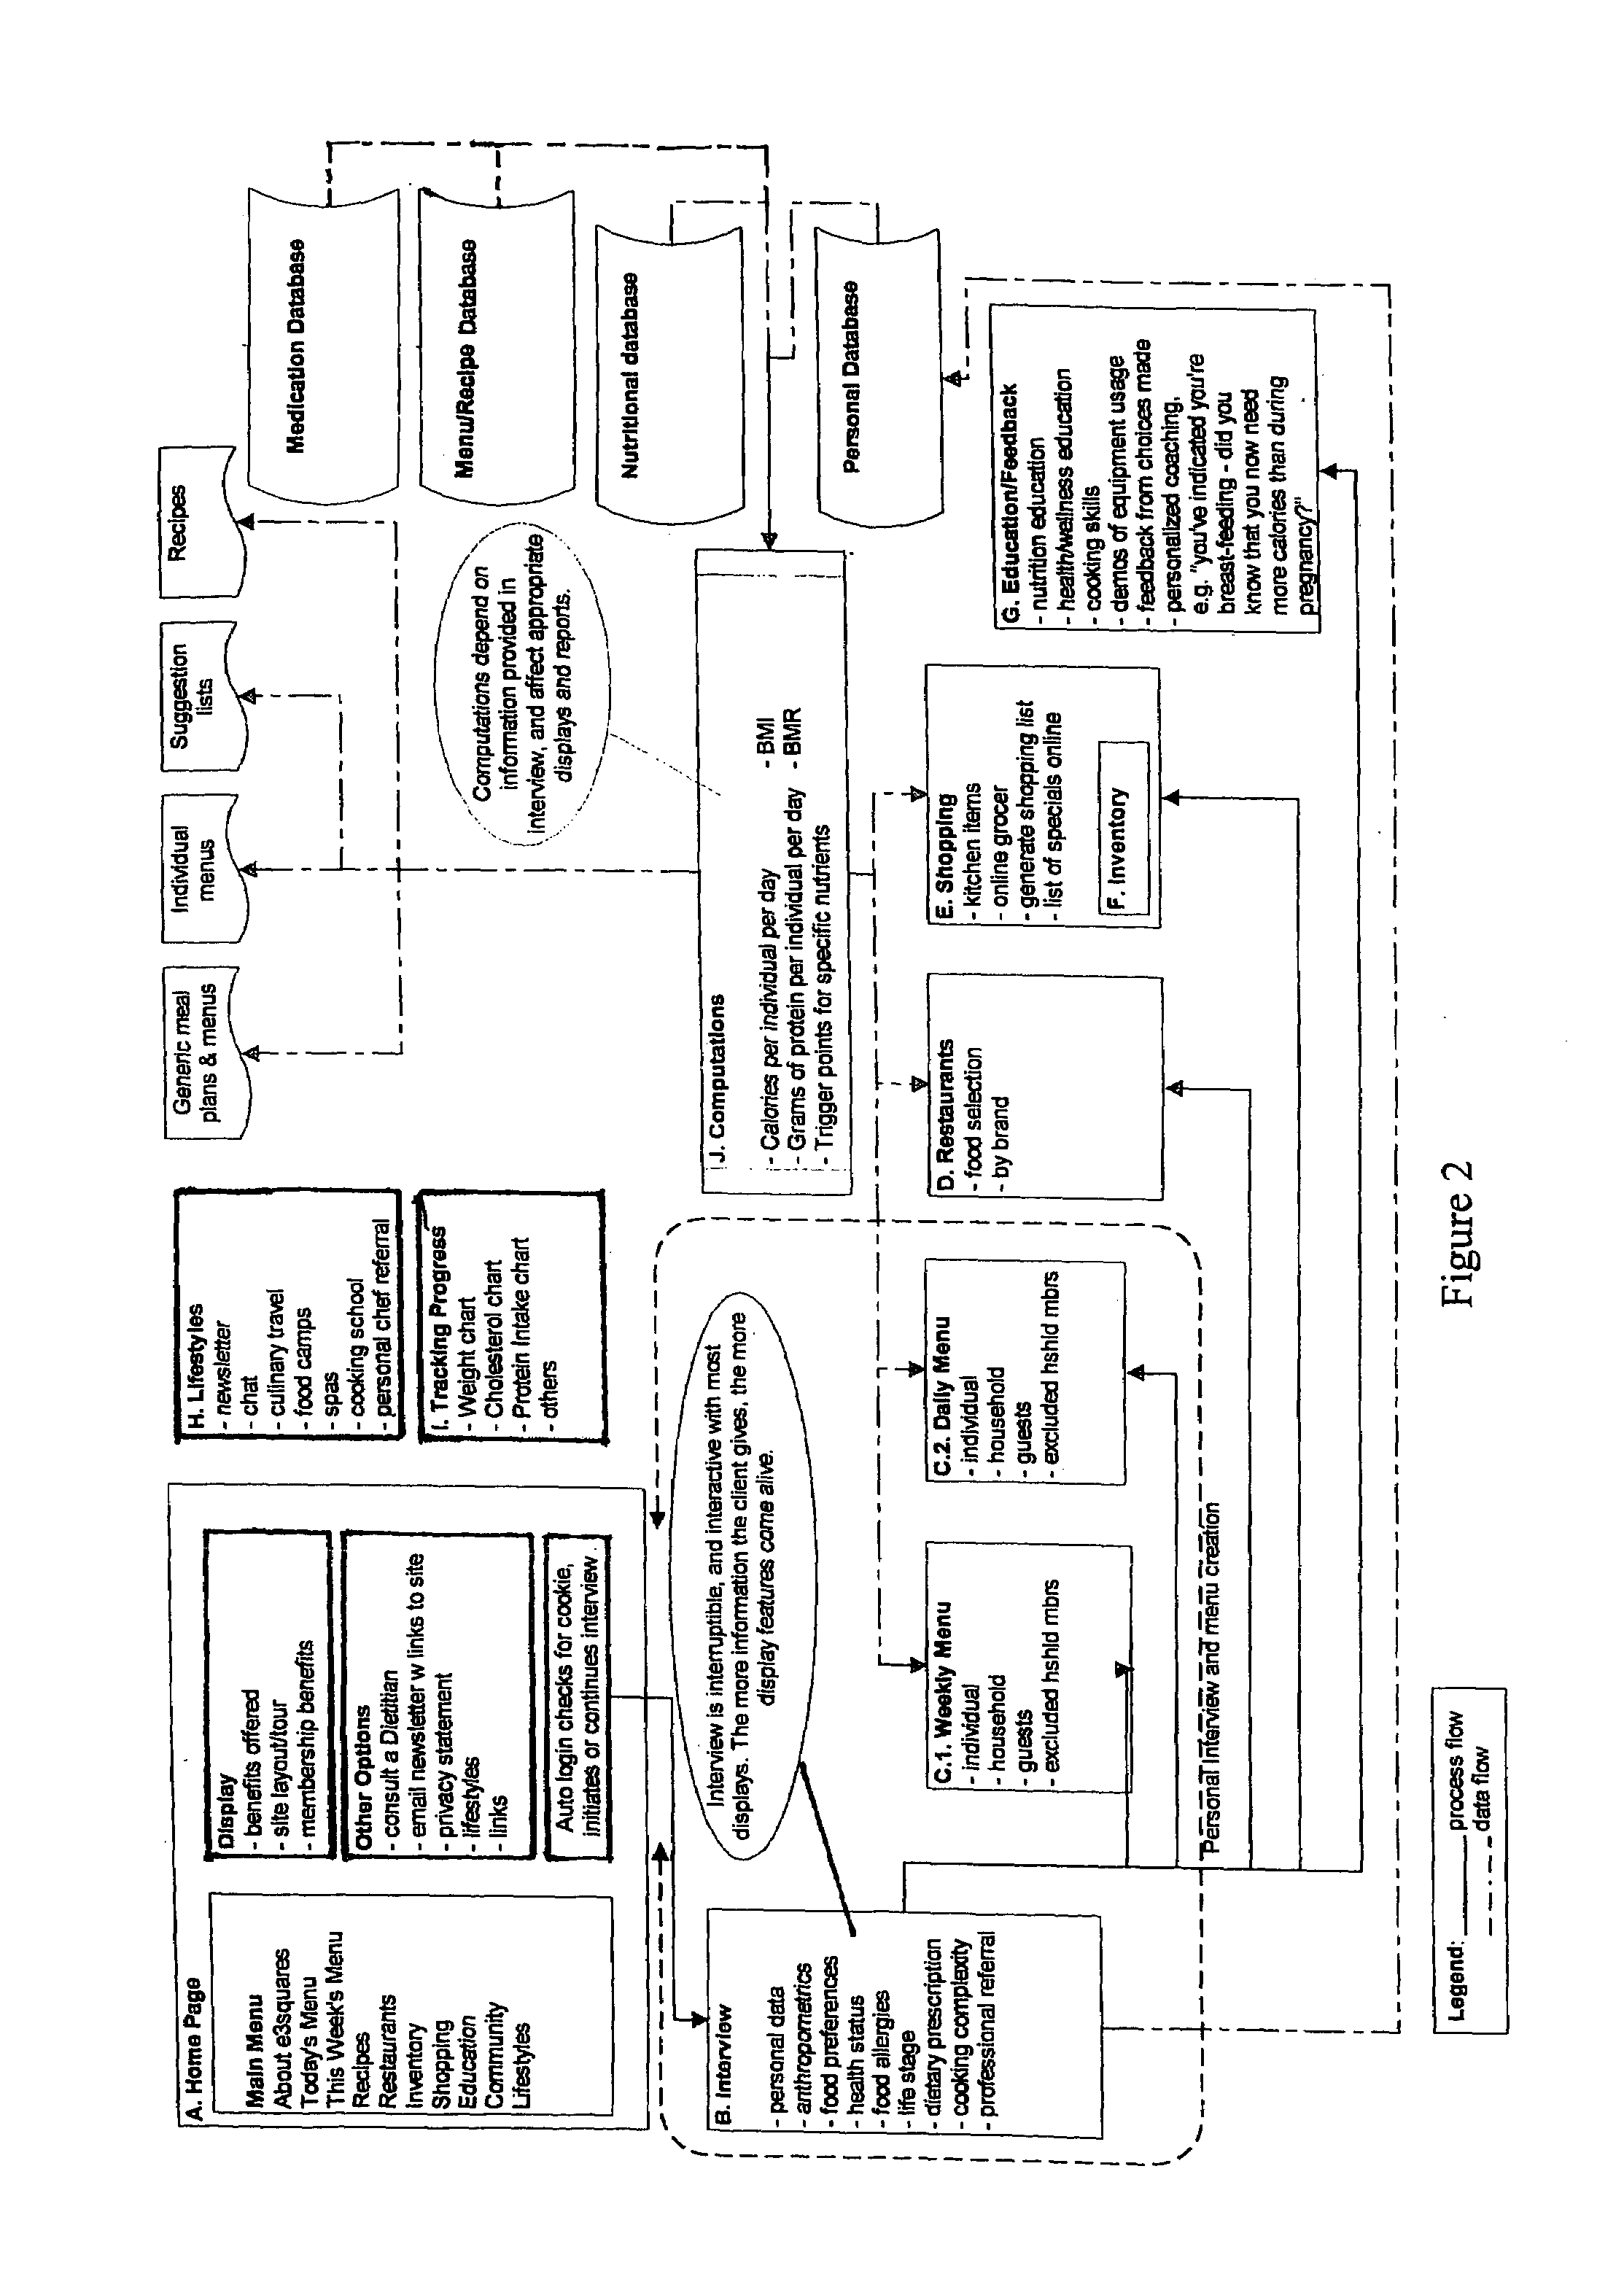 Method and system for providing dietary information